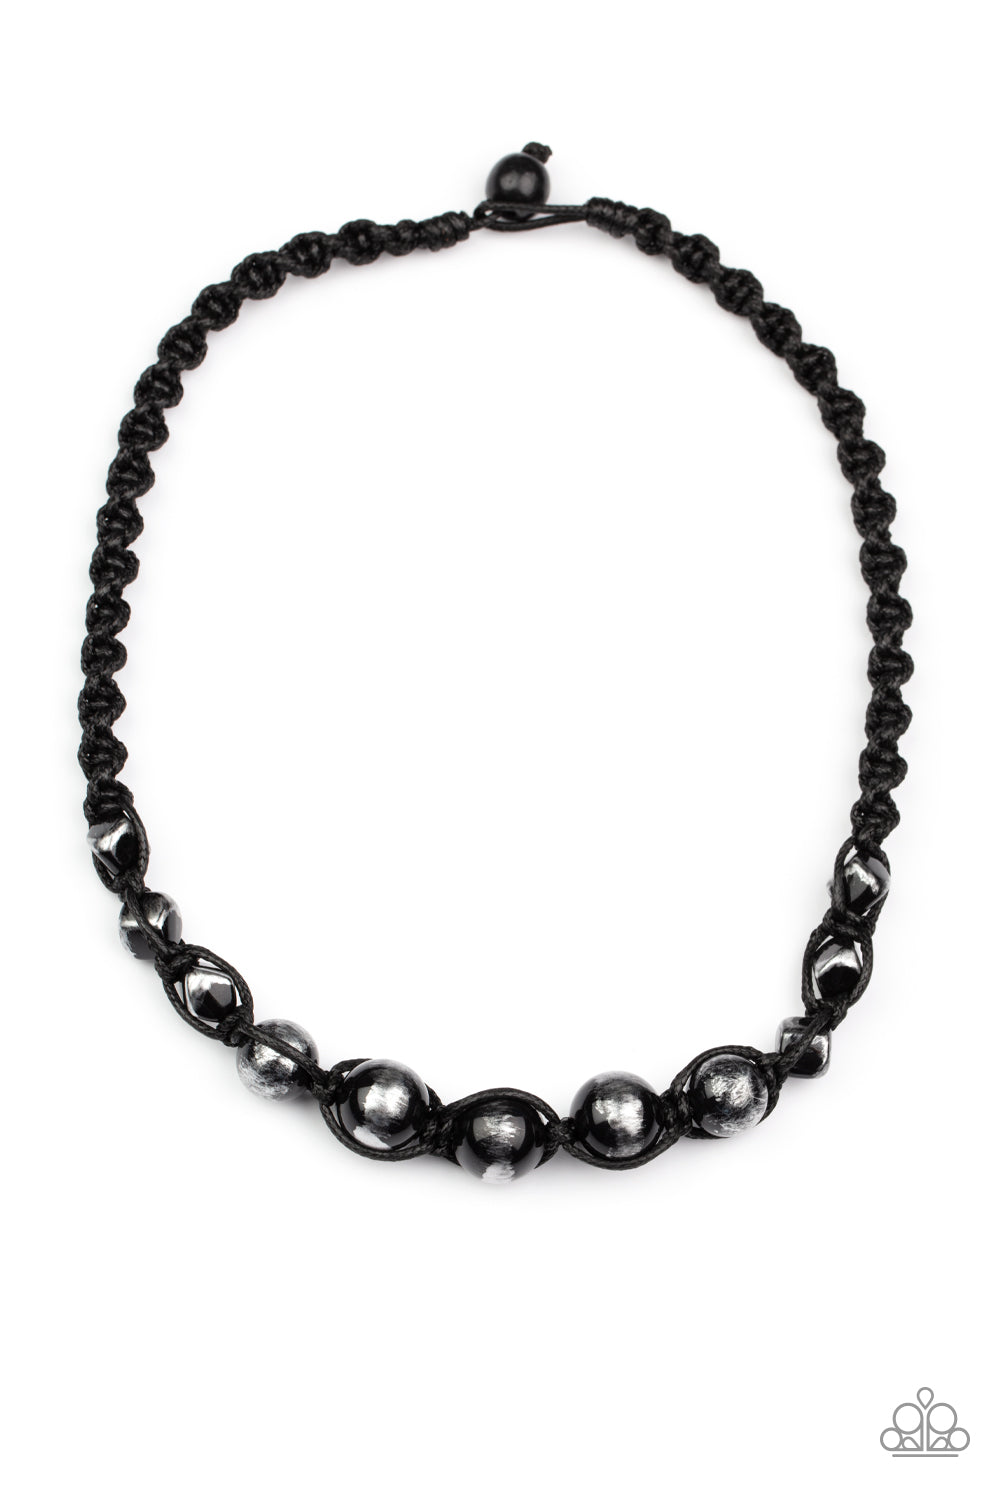 Loose Cannon Black Urban Necklace - Paparazzi Accessories  Brushed in shiny black accents, a gritty collection of faceted and round silver beads are knotted in place with braided black cording below the collar for an urban flair. Features a button loop closure.  Sold as one individual necklace.